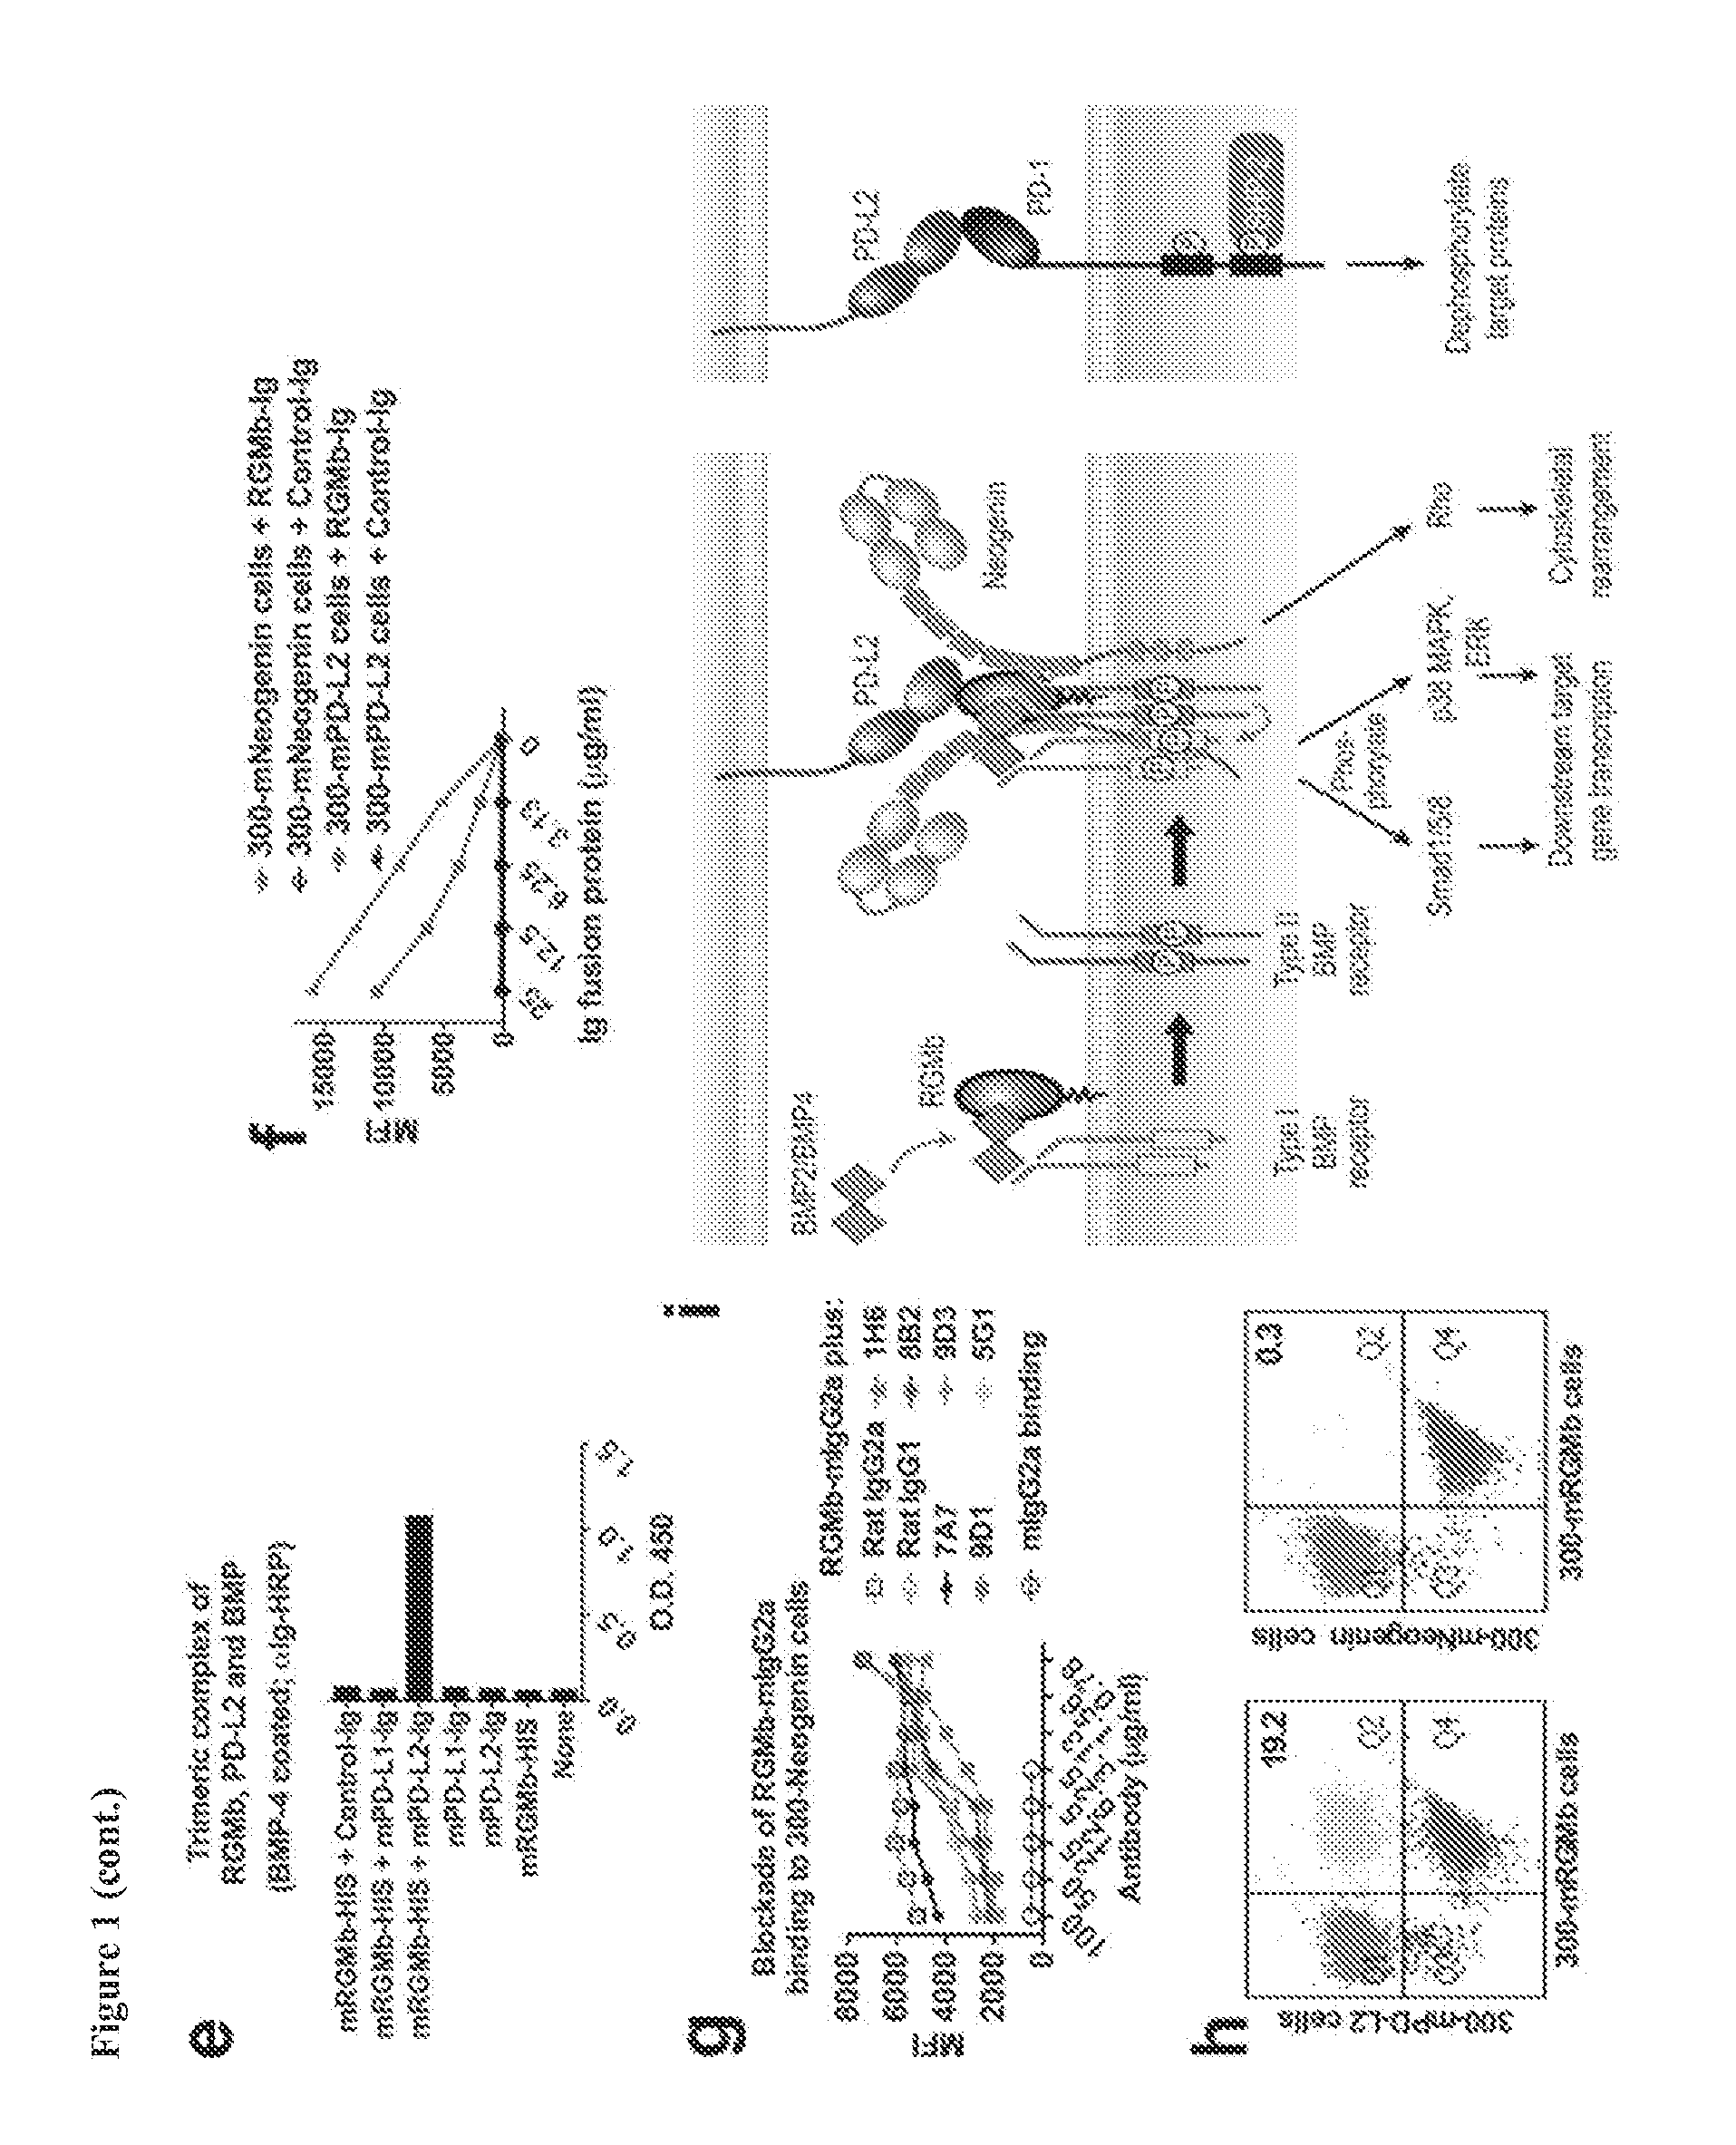 AGENTS THAT MODULATE RGMb-NEOGENIN-BMP SIGNALING AND METHODS OF USE THEREOF